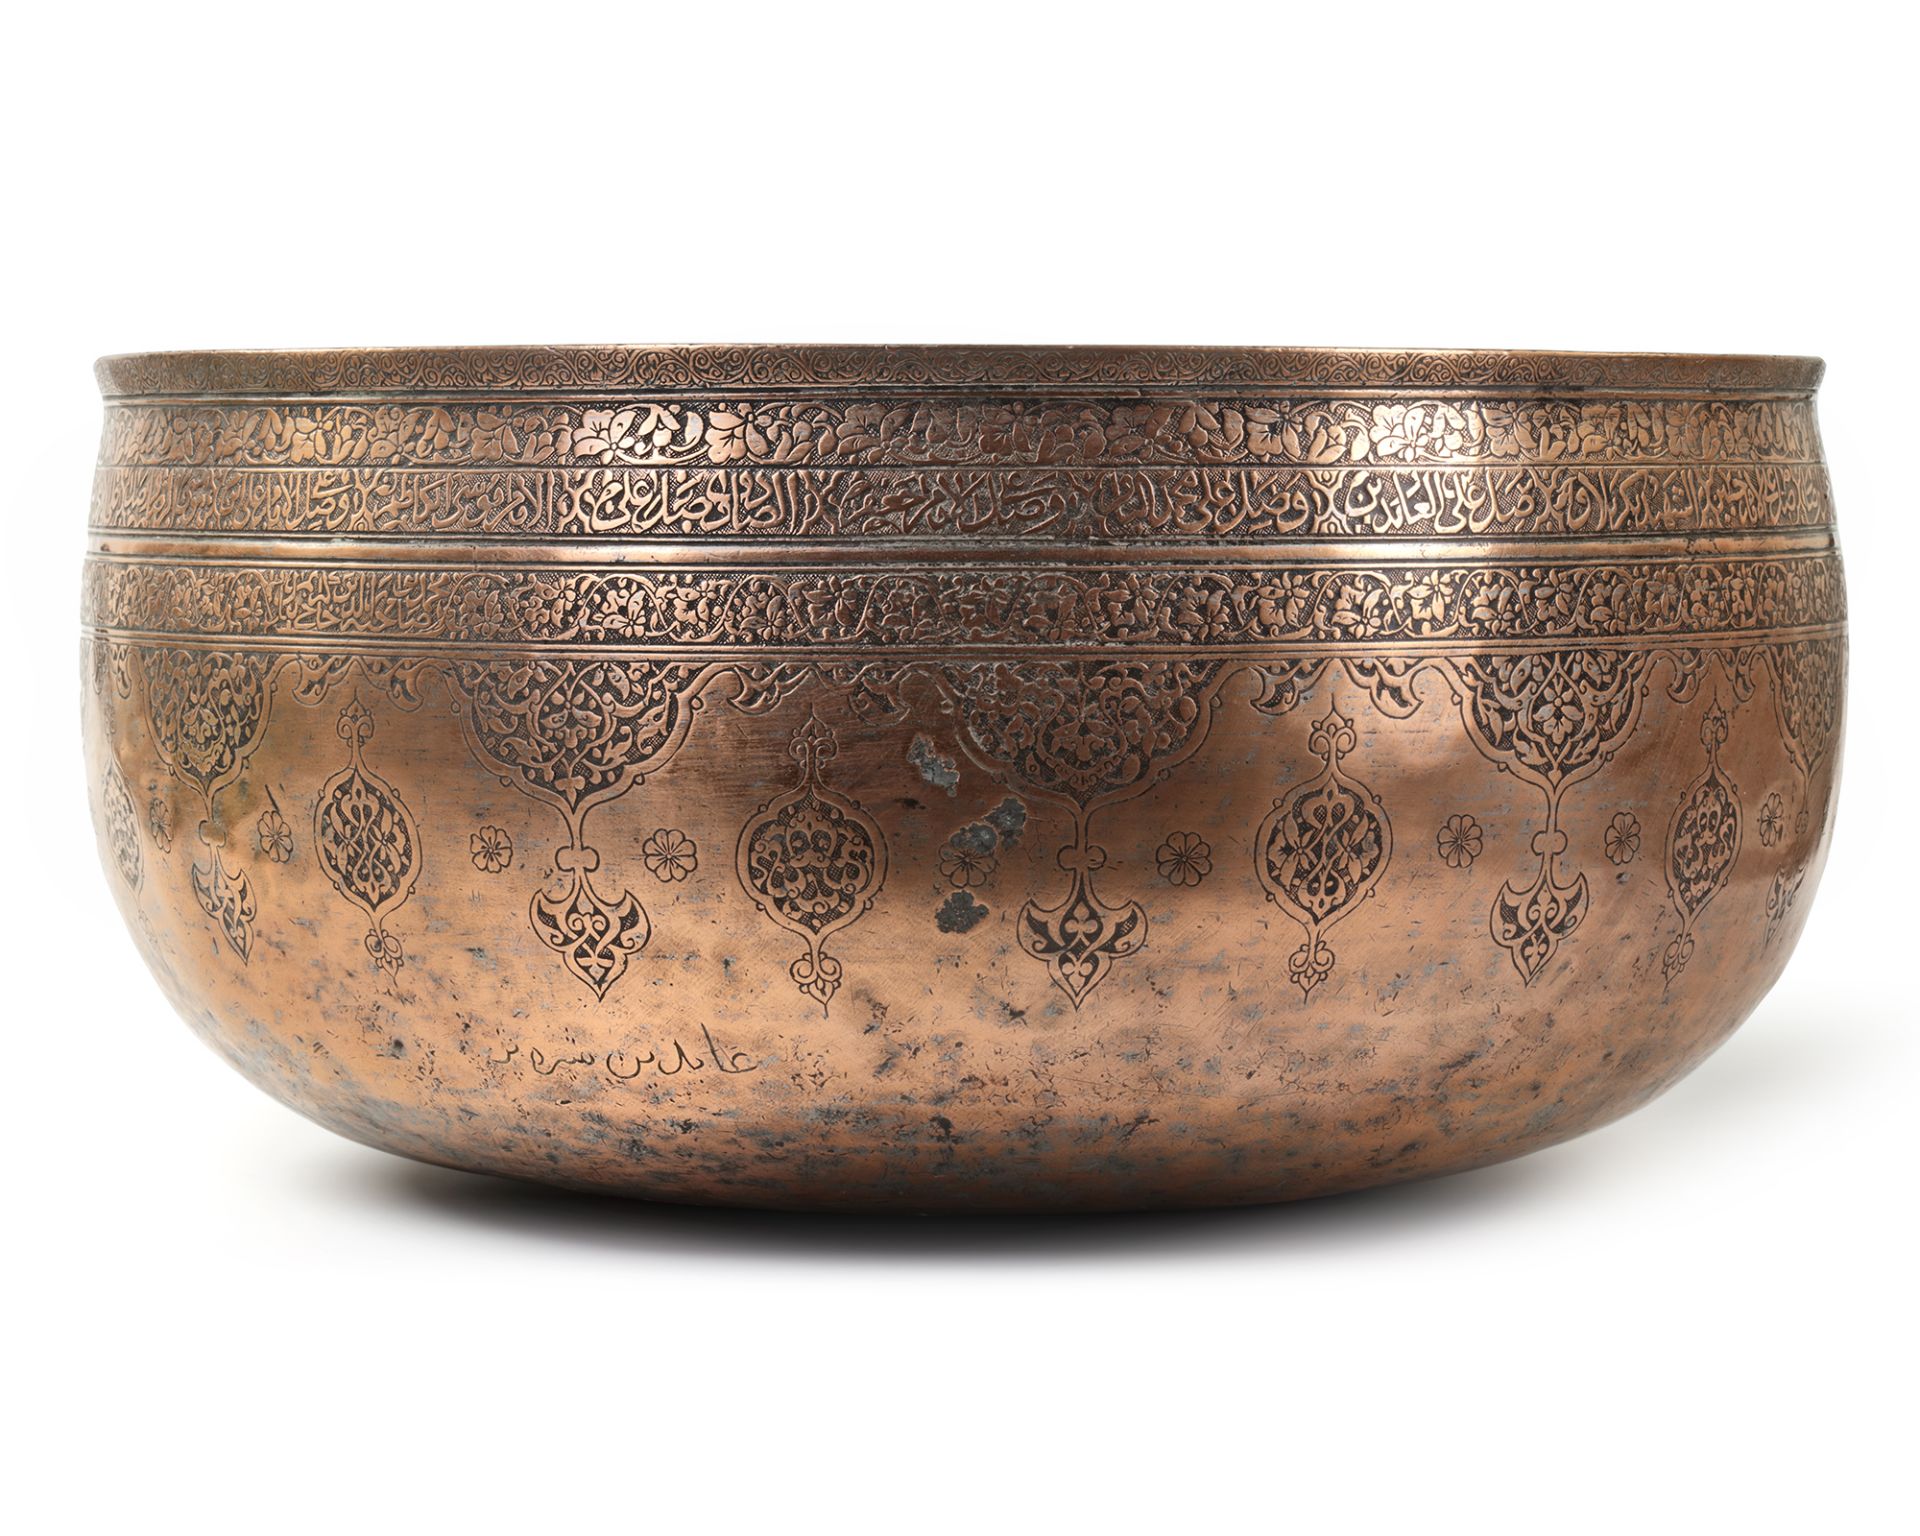 A MONUMENTAL LATE TIMURID ENGRAVED COPPER BOWL CENTRAL ASIA, LATE 15TH-EARLY 16TH CENTURY - Image 4 of 6